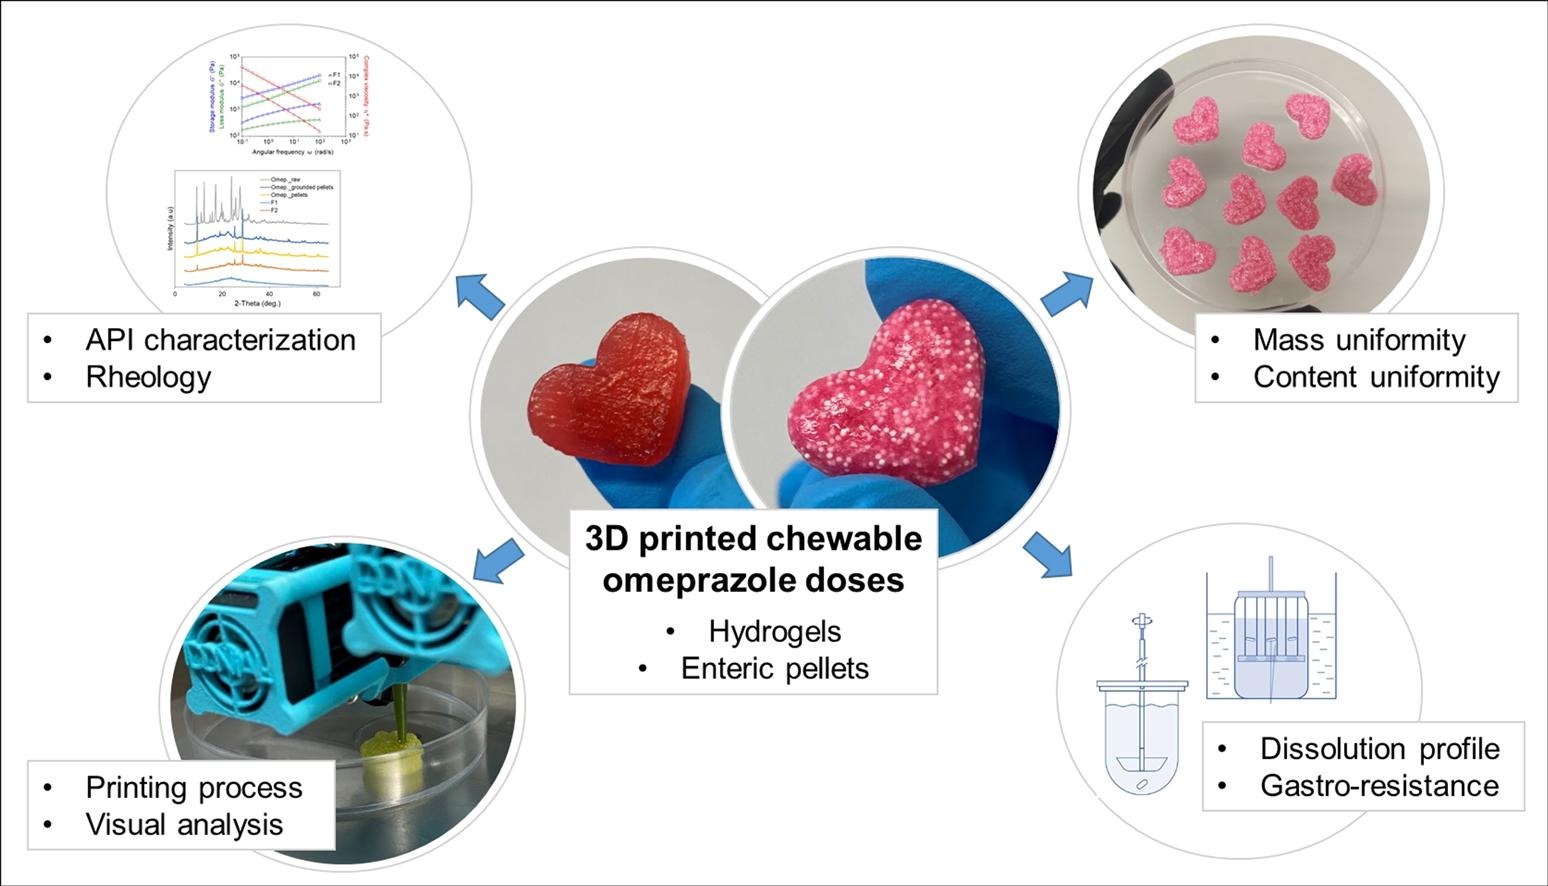 Pellets and gummies: Seeking a 3D printed gastro-resistant omeprazole dosage for paediatric administration